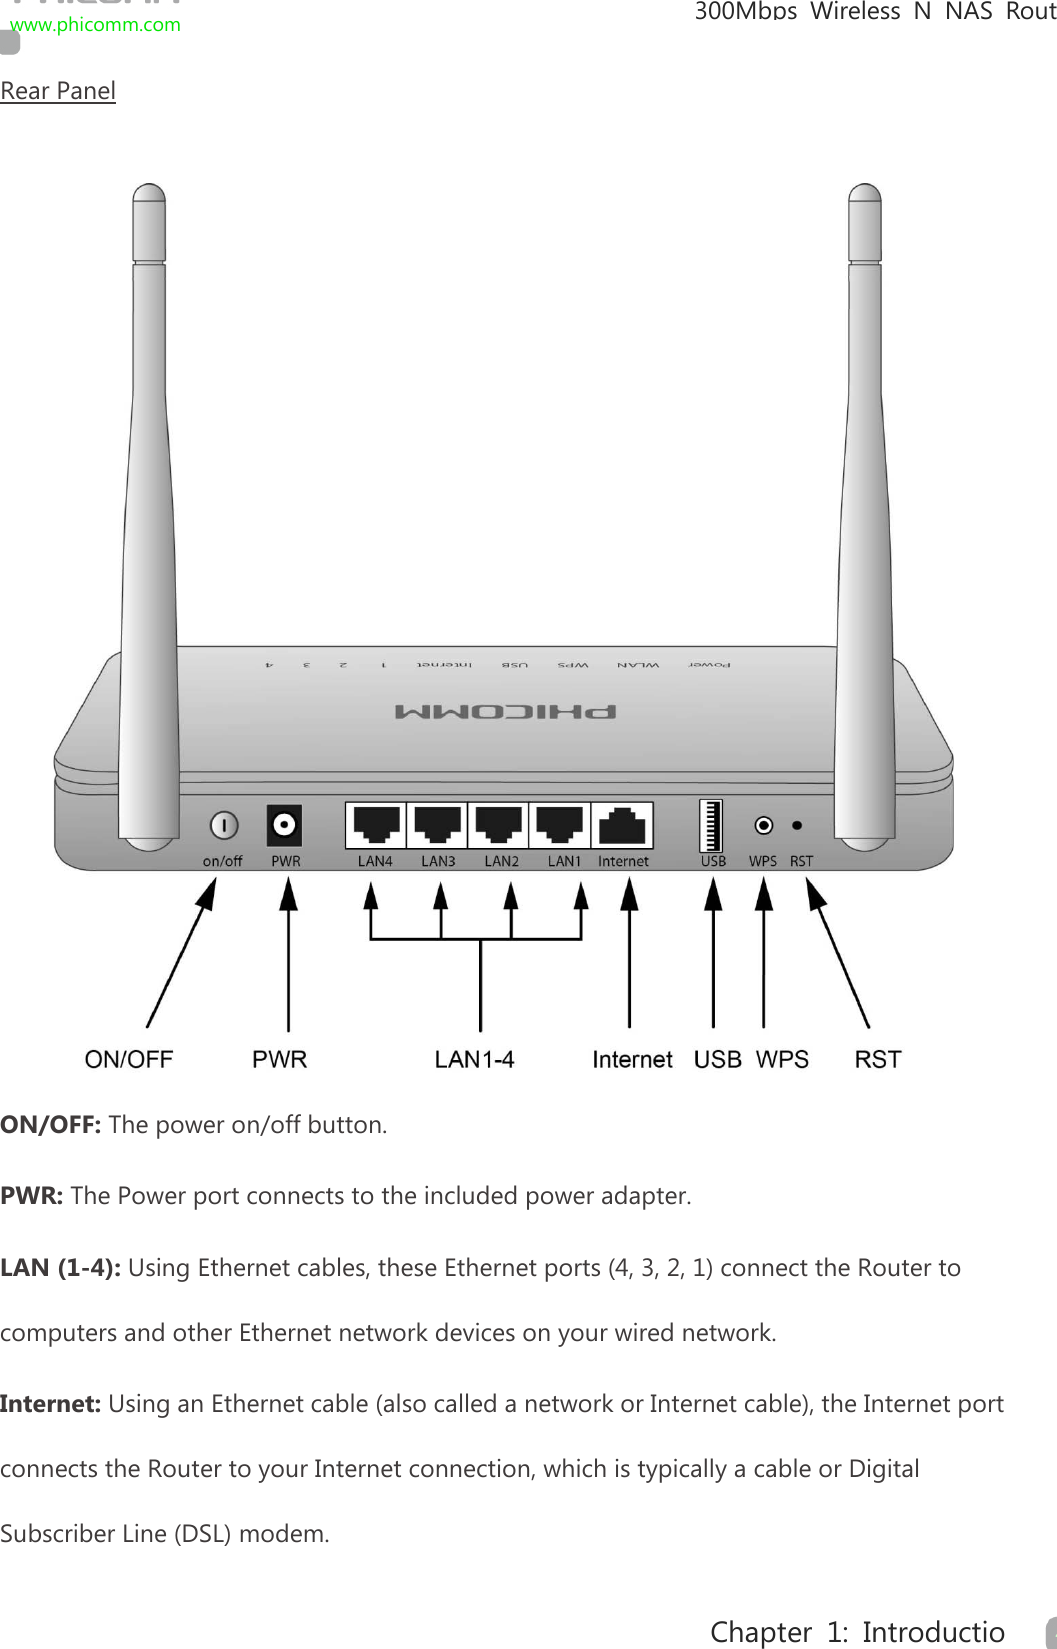                                                            300Mbps Wireless N NAS  Rout www.phicomm.com 4 Chapter 1: Introductio  Rear Panel  ON/OFF: The power on/off button. PWR: The Power port connects to the included power adapter. LAN (1-4): Using Ethernet cables, these Ethernet ports (4, 3, 2, 1) connect the Router to computers and other Ethernet network devices on your wired network. Internet: Using an Ethernet cable (also called a network or Internet cable), the Internet port connects the Router to your Internet connection, which is typically a cable or Digital Subscriber Line (DSL) modem. 